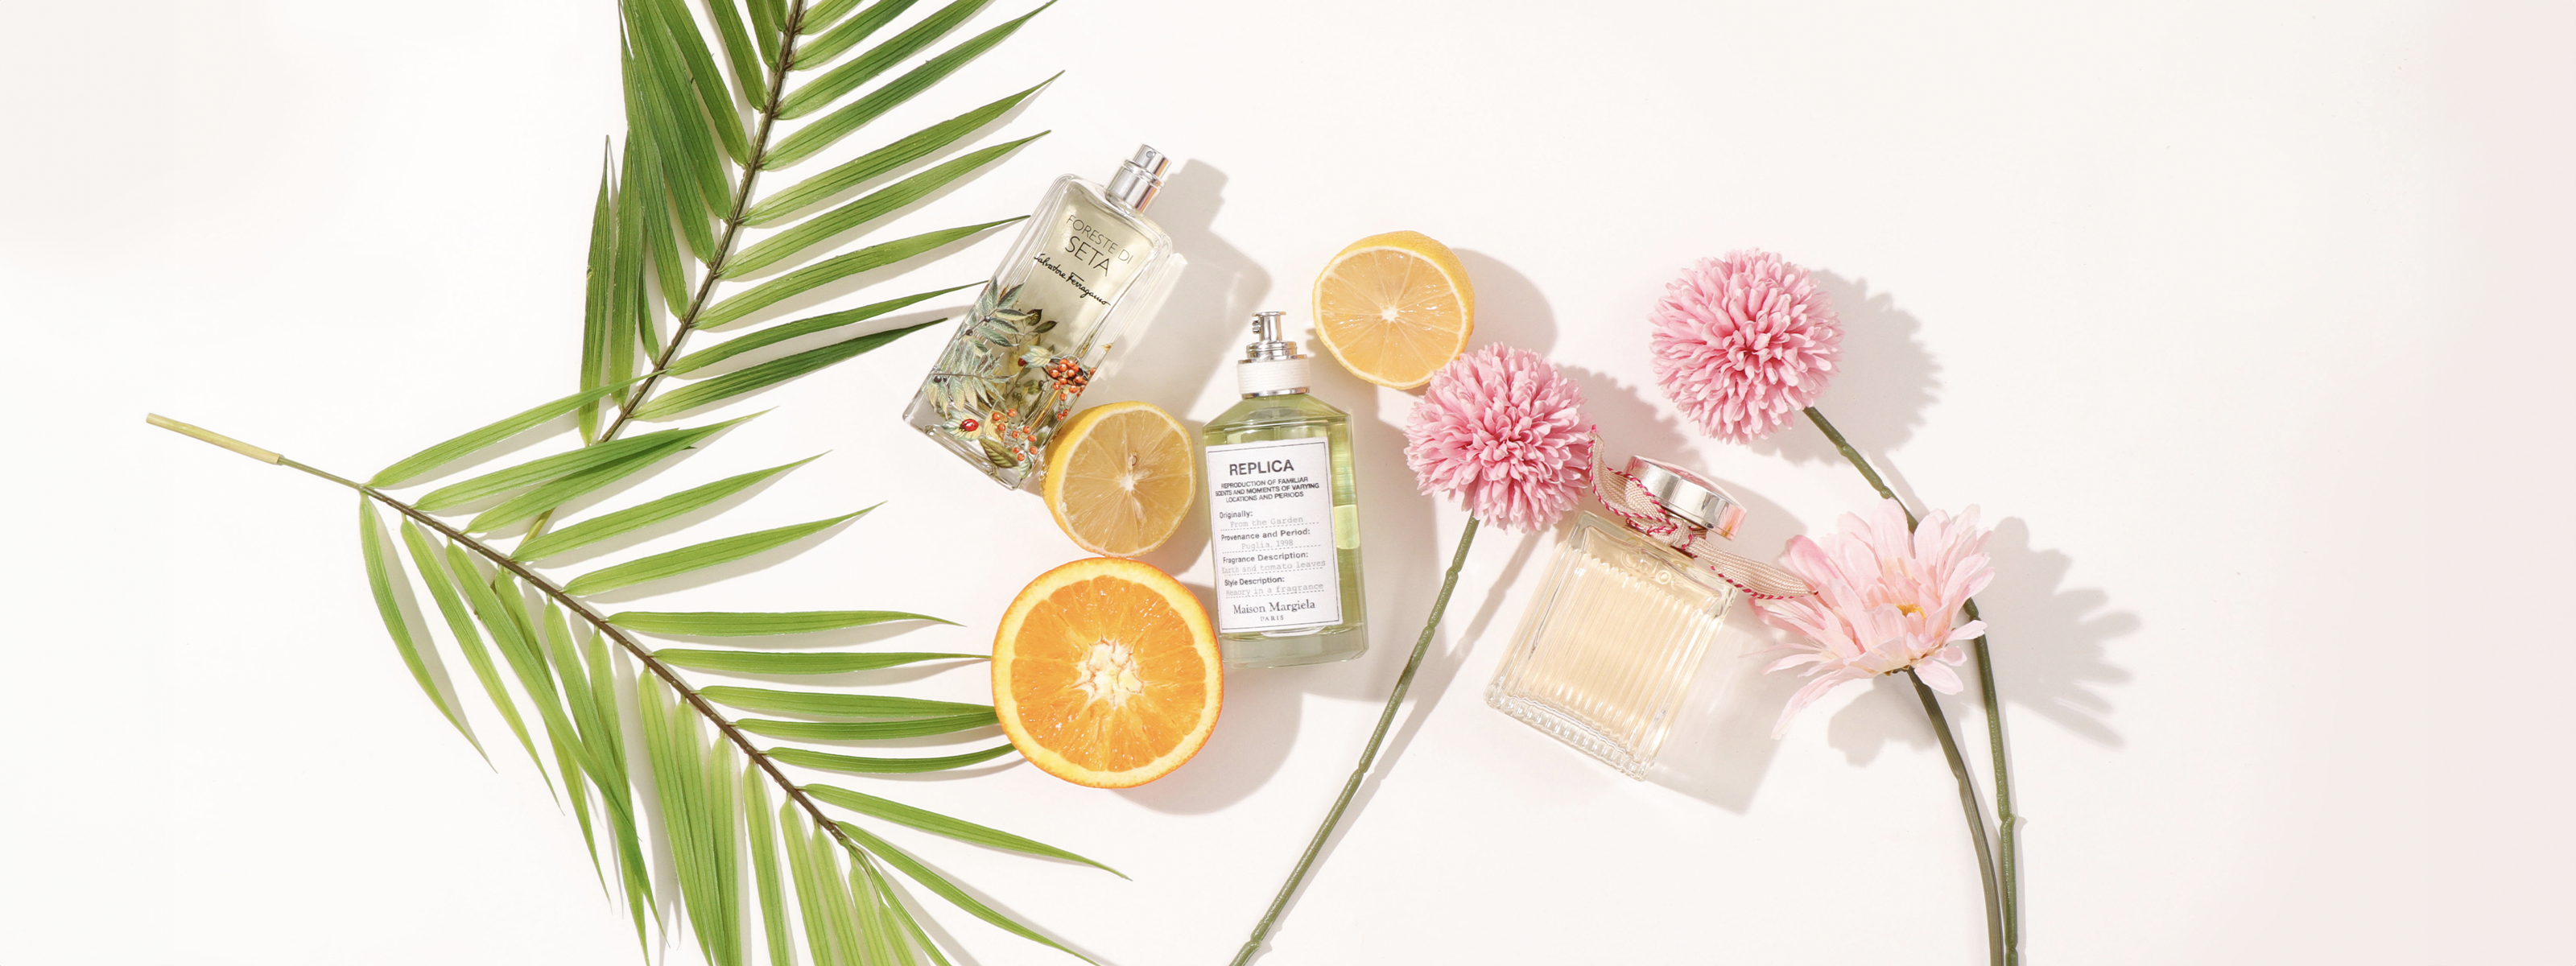 Delightful and refreshing scents for summer